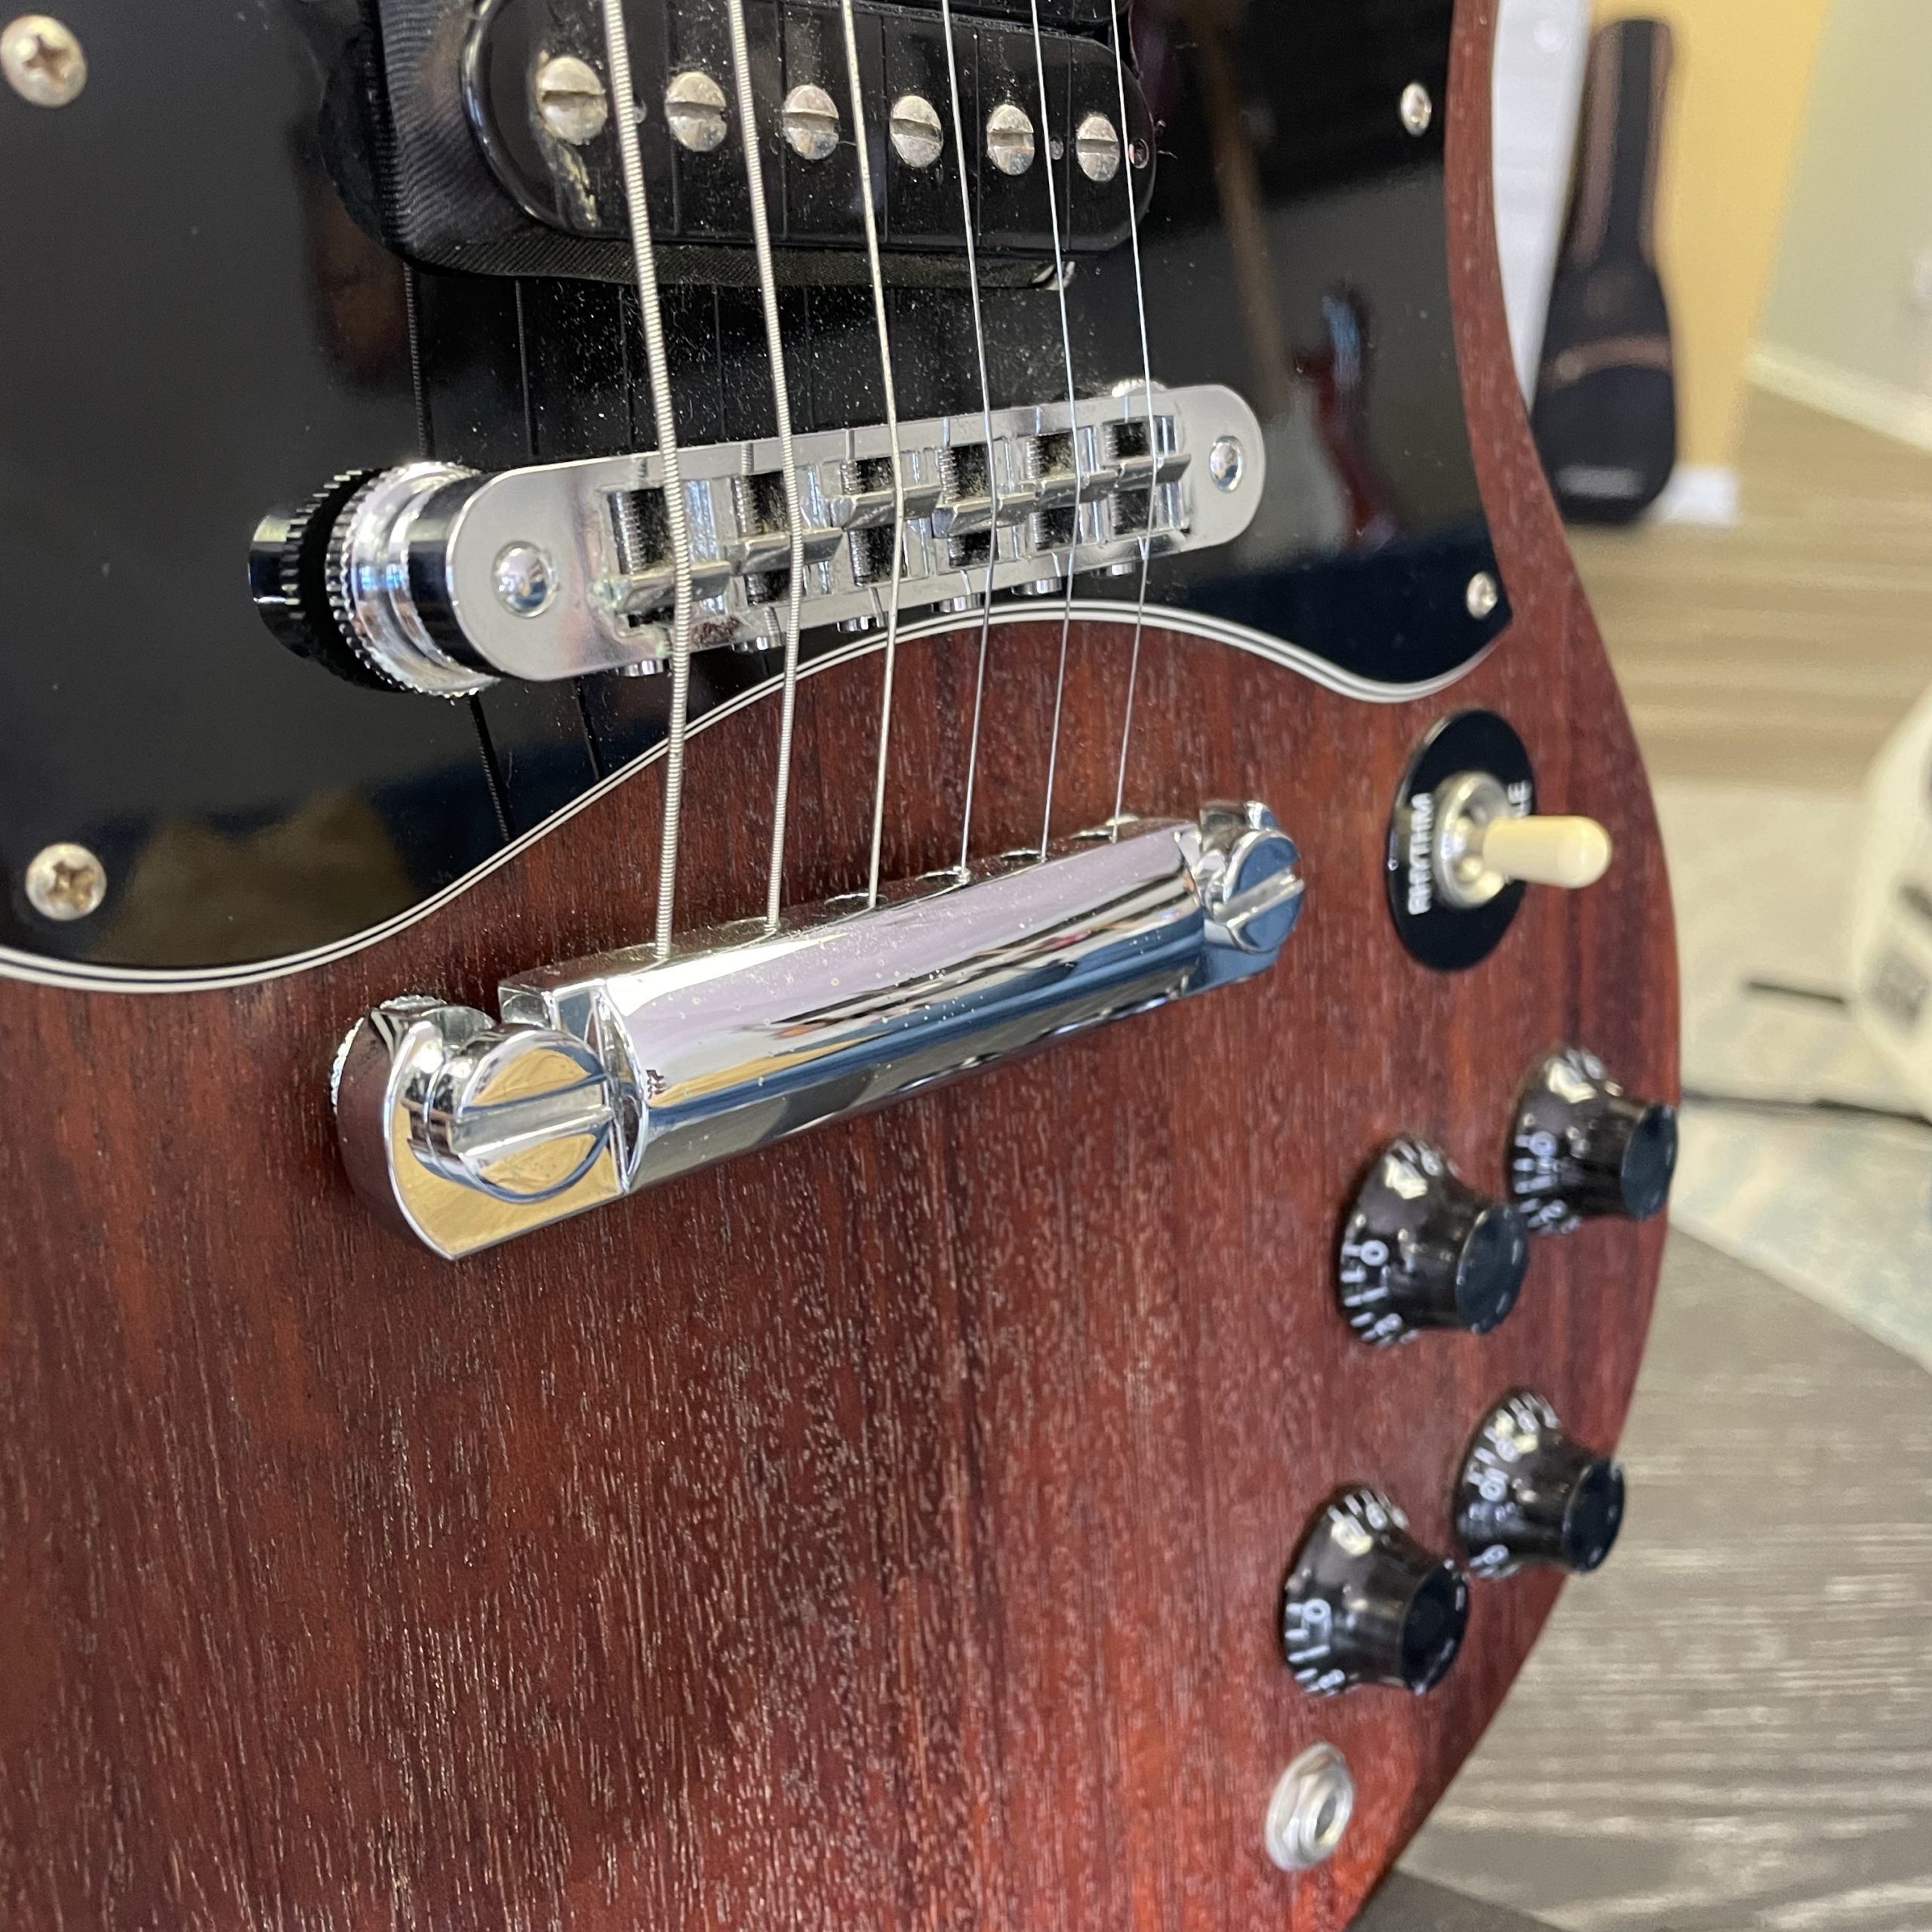 2008 Gibson SG Special Faded